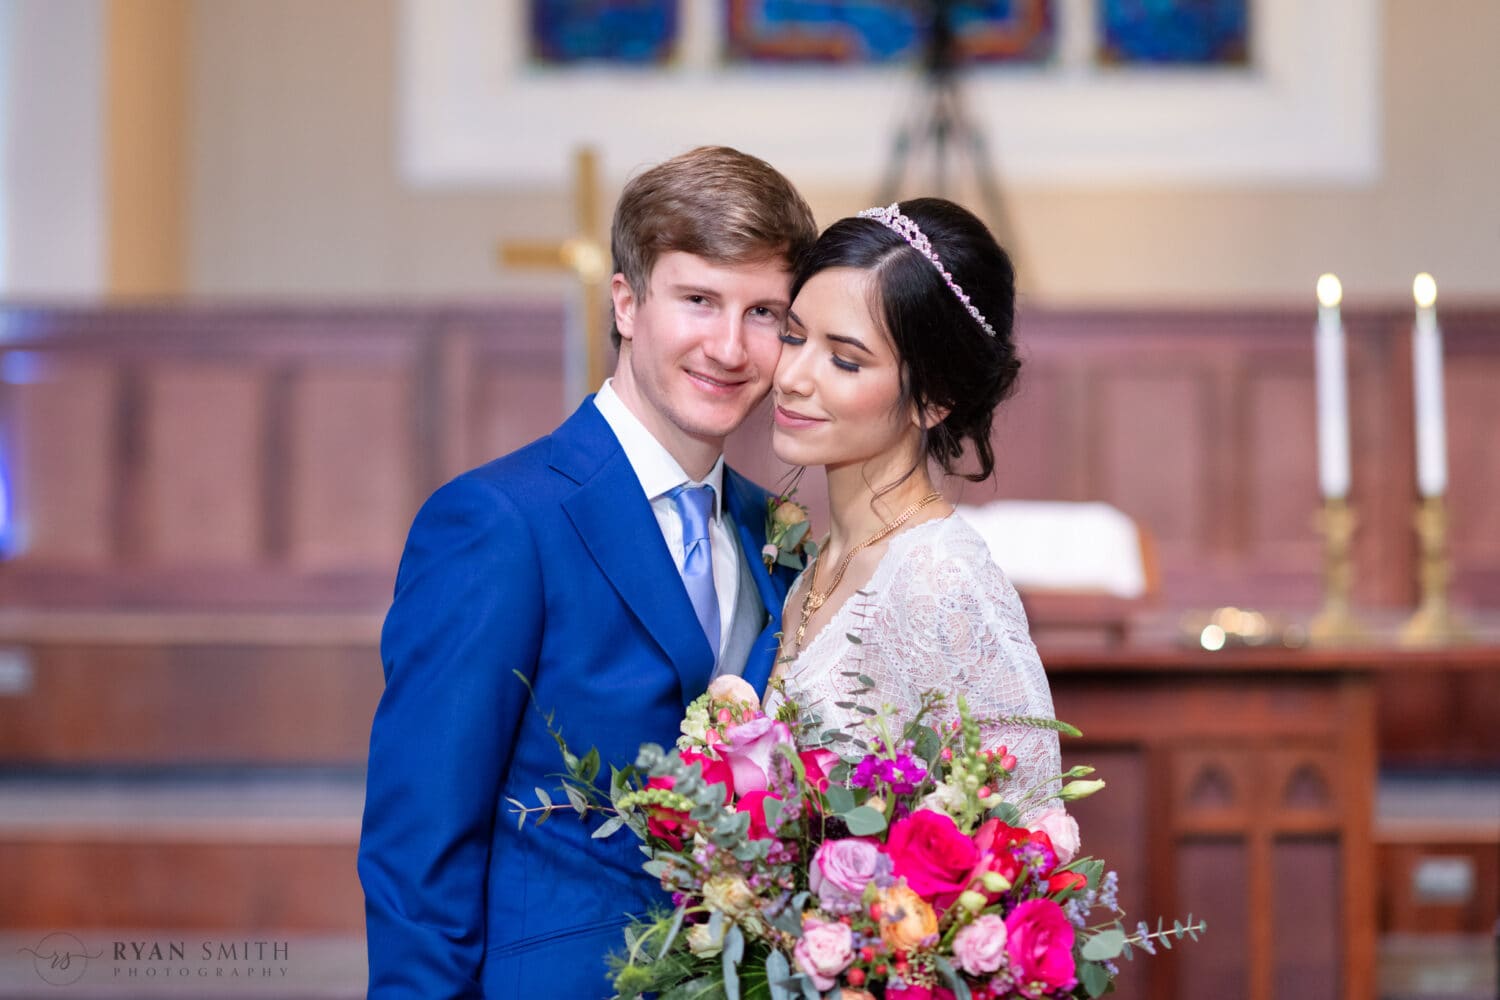 Portraits with wedding couple in the church - Ocean Drive Church - North Myrtle Beach